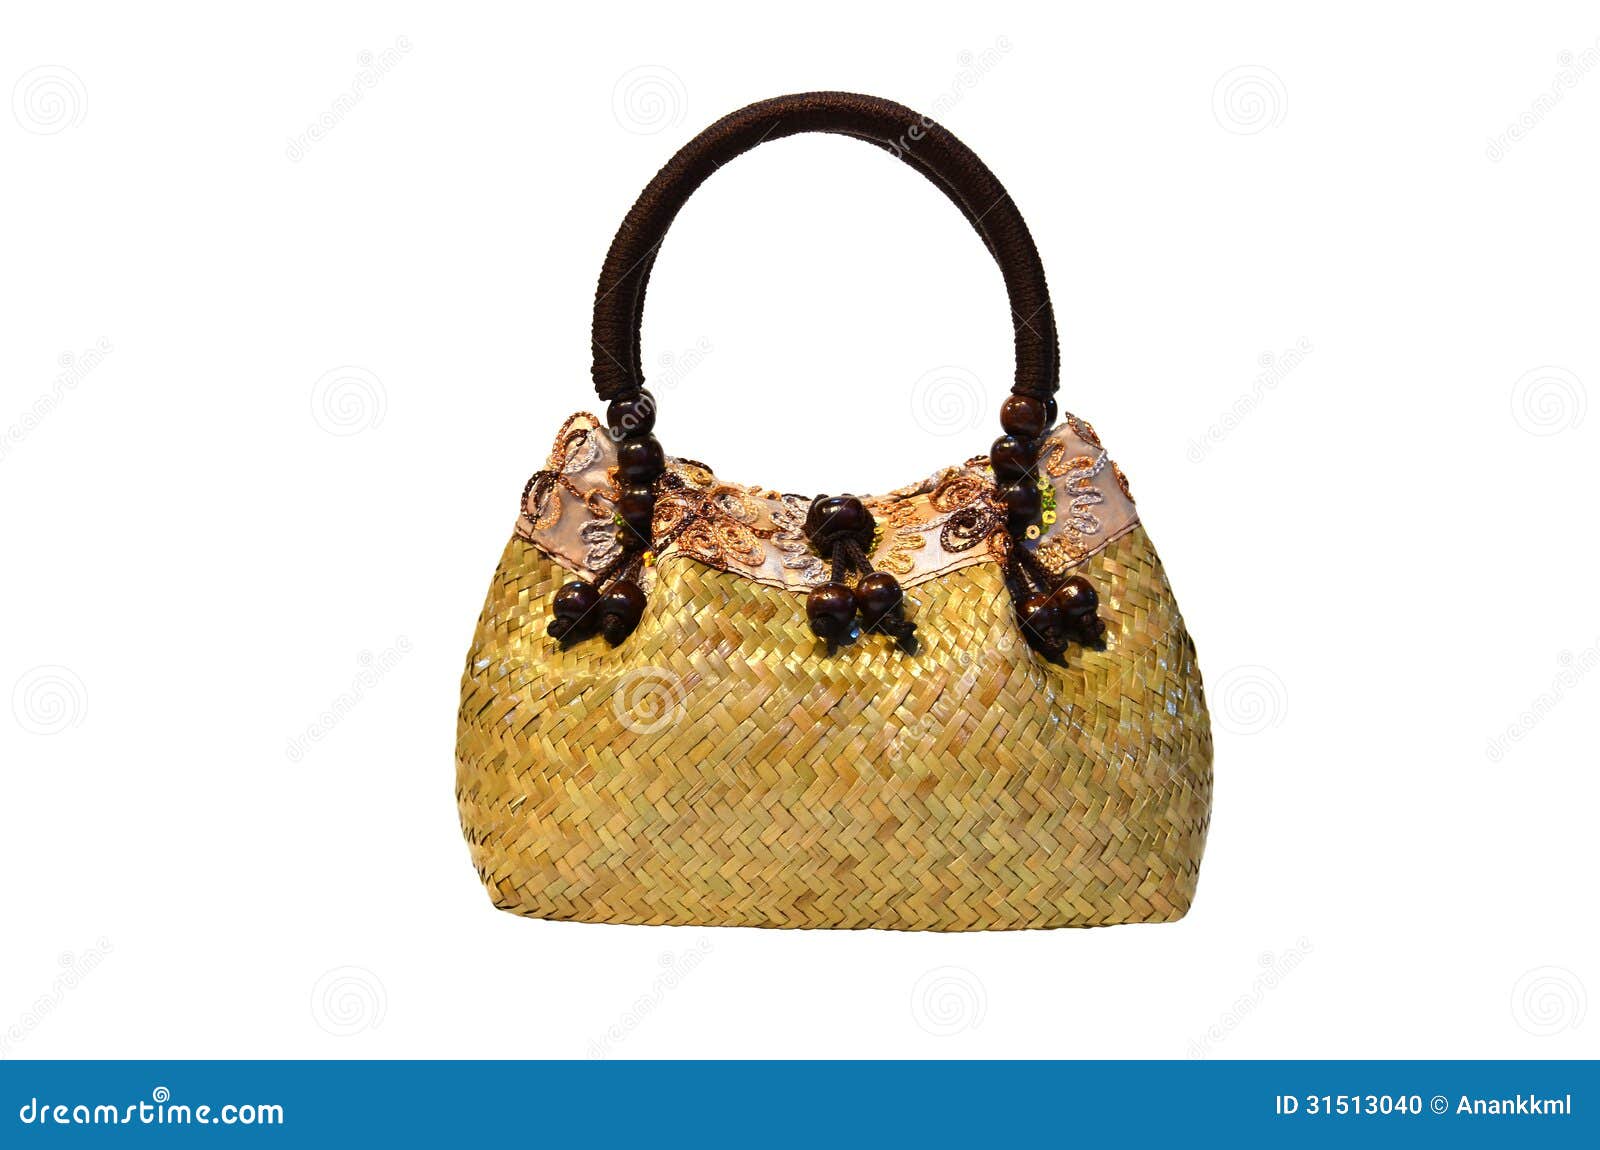 Bamboo wicker bag stock photo. Image of accessory, weave - 31513040